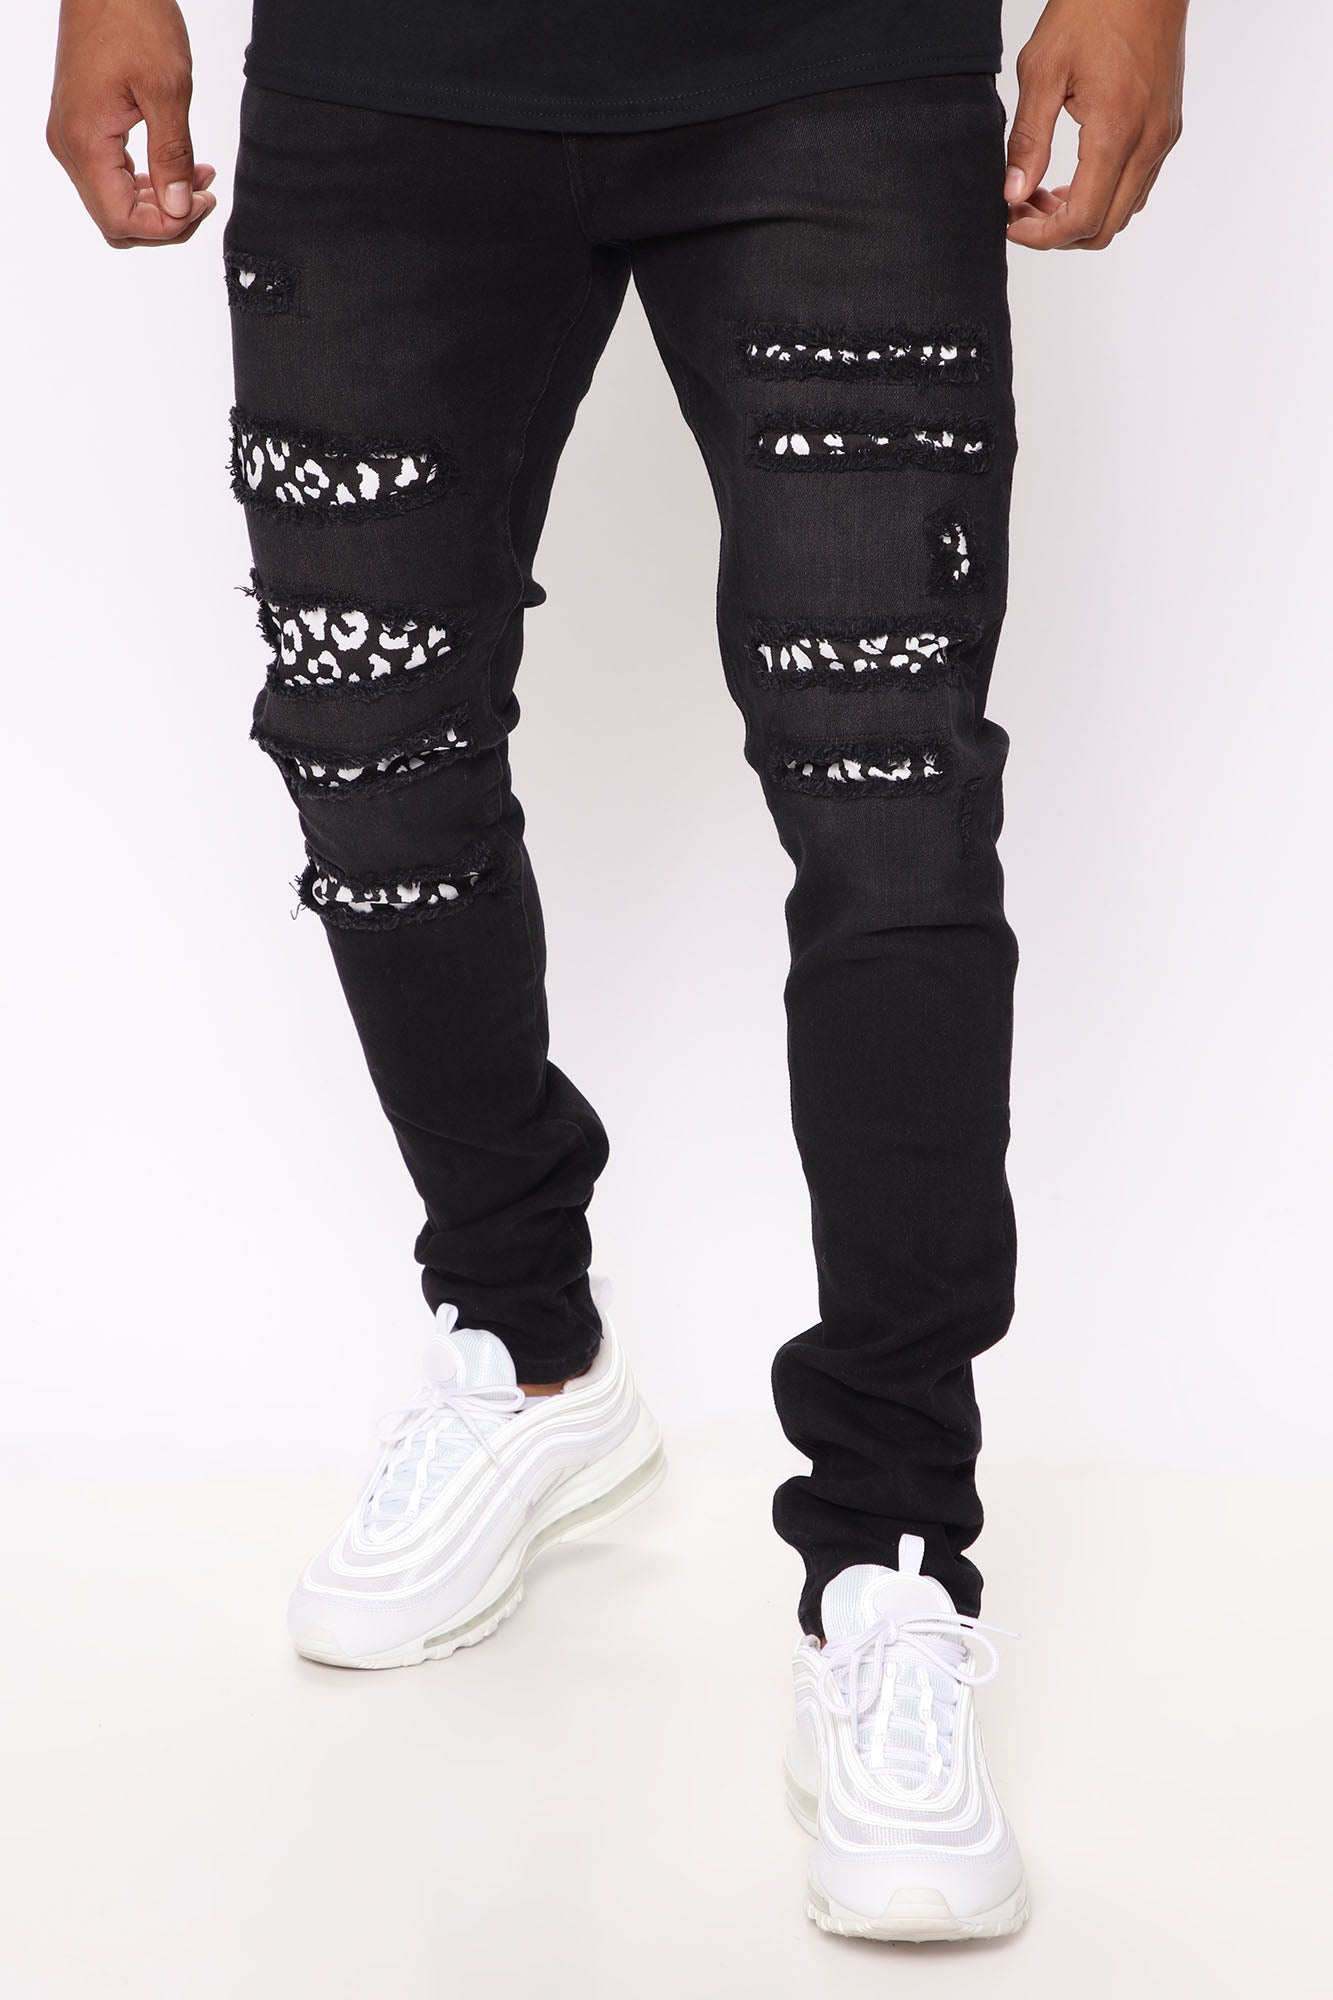 Stay Real Ripped Stacked Skinny Jeans - Black, Fashion Nova, Mens Jeans